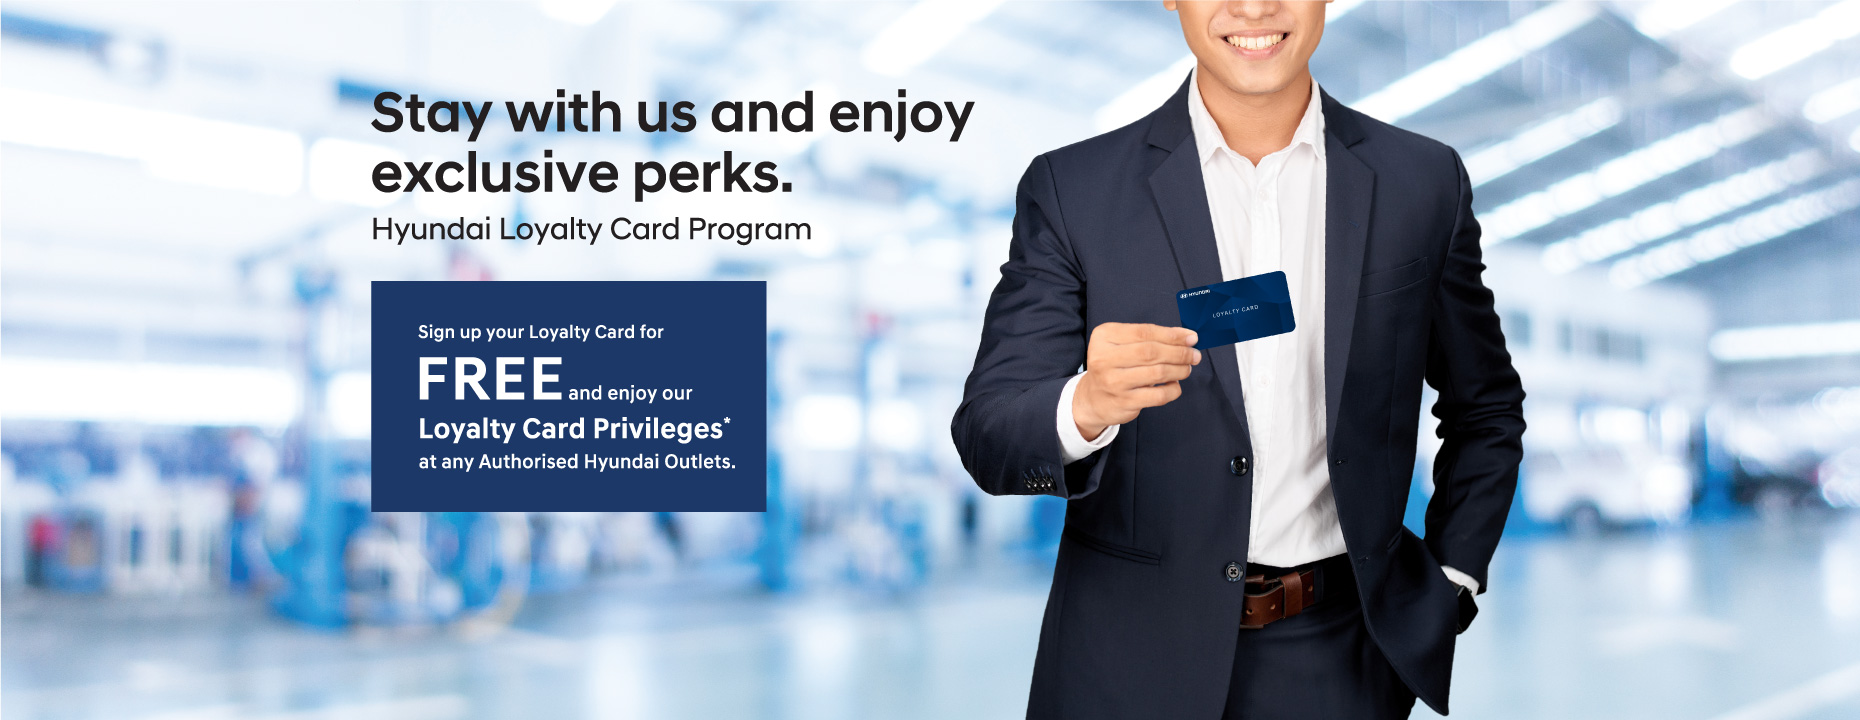 Hyundai Loyalty Card Program  | Stay with us and enjoy exclusive perks. Sign up your Loyalty Card for FREE and enjoy our Loyalty Card Privileges* at any Authorised Hyundai Outlets. Terms & conditions apply.